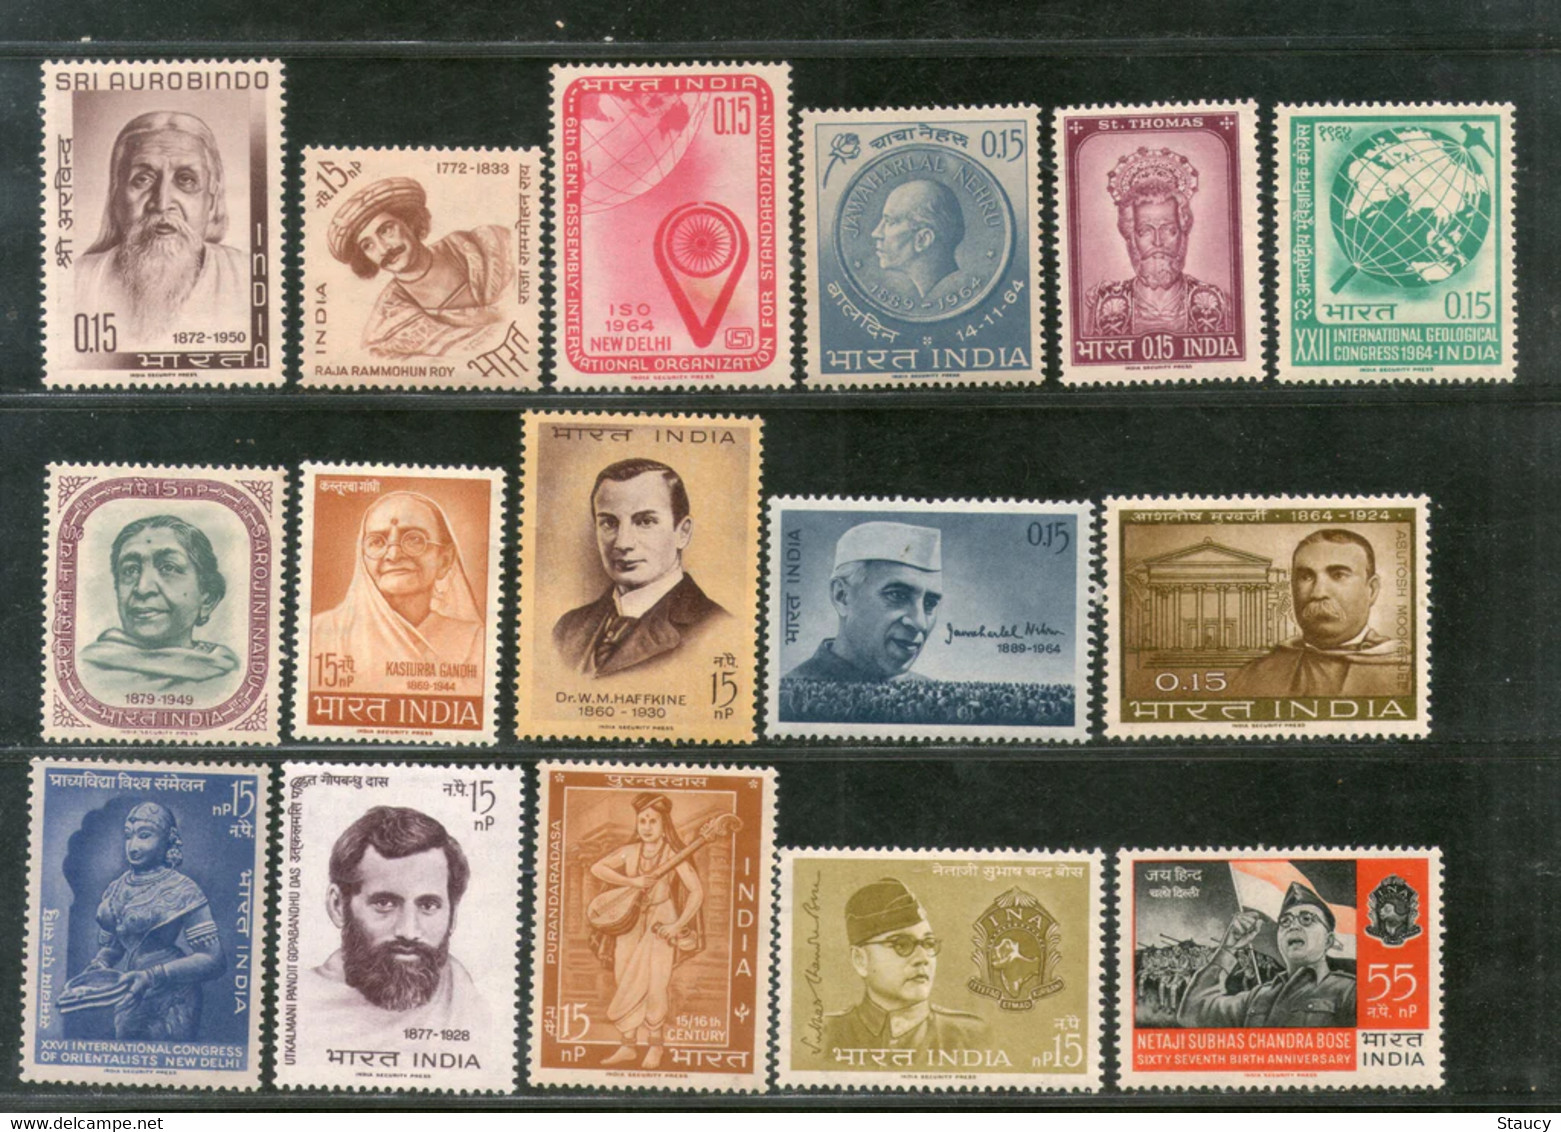 India 1964 Complete Year Pack / Set / Collection Total 16 Stamps (No Missing) MNH As Per Scan - Annate Complete